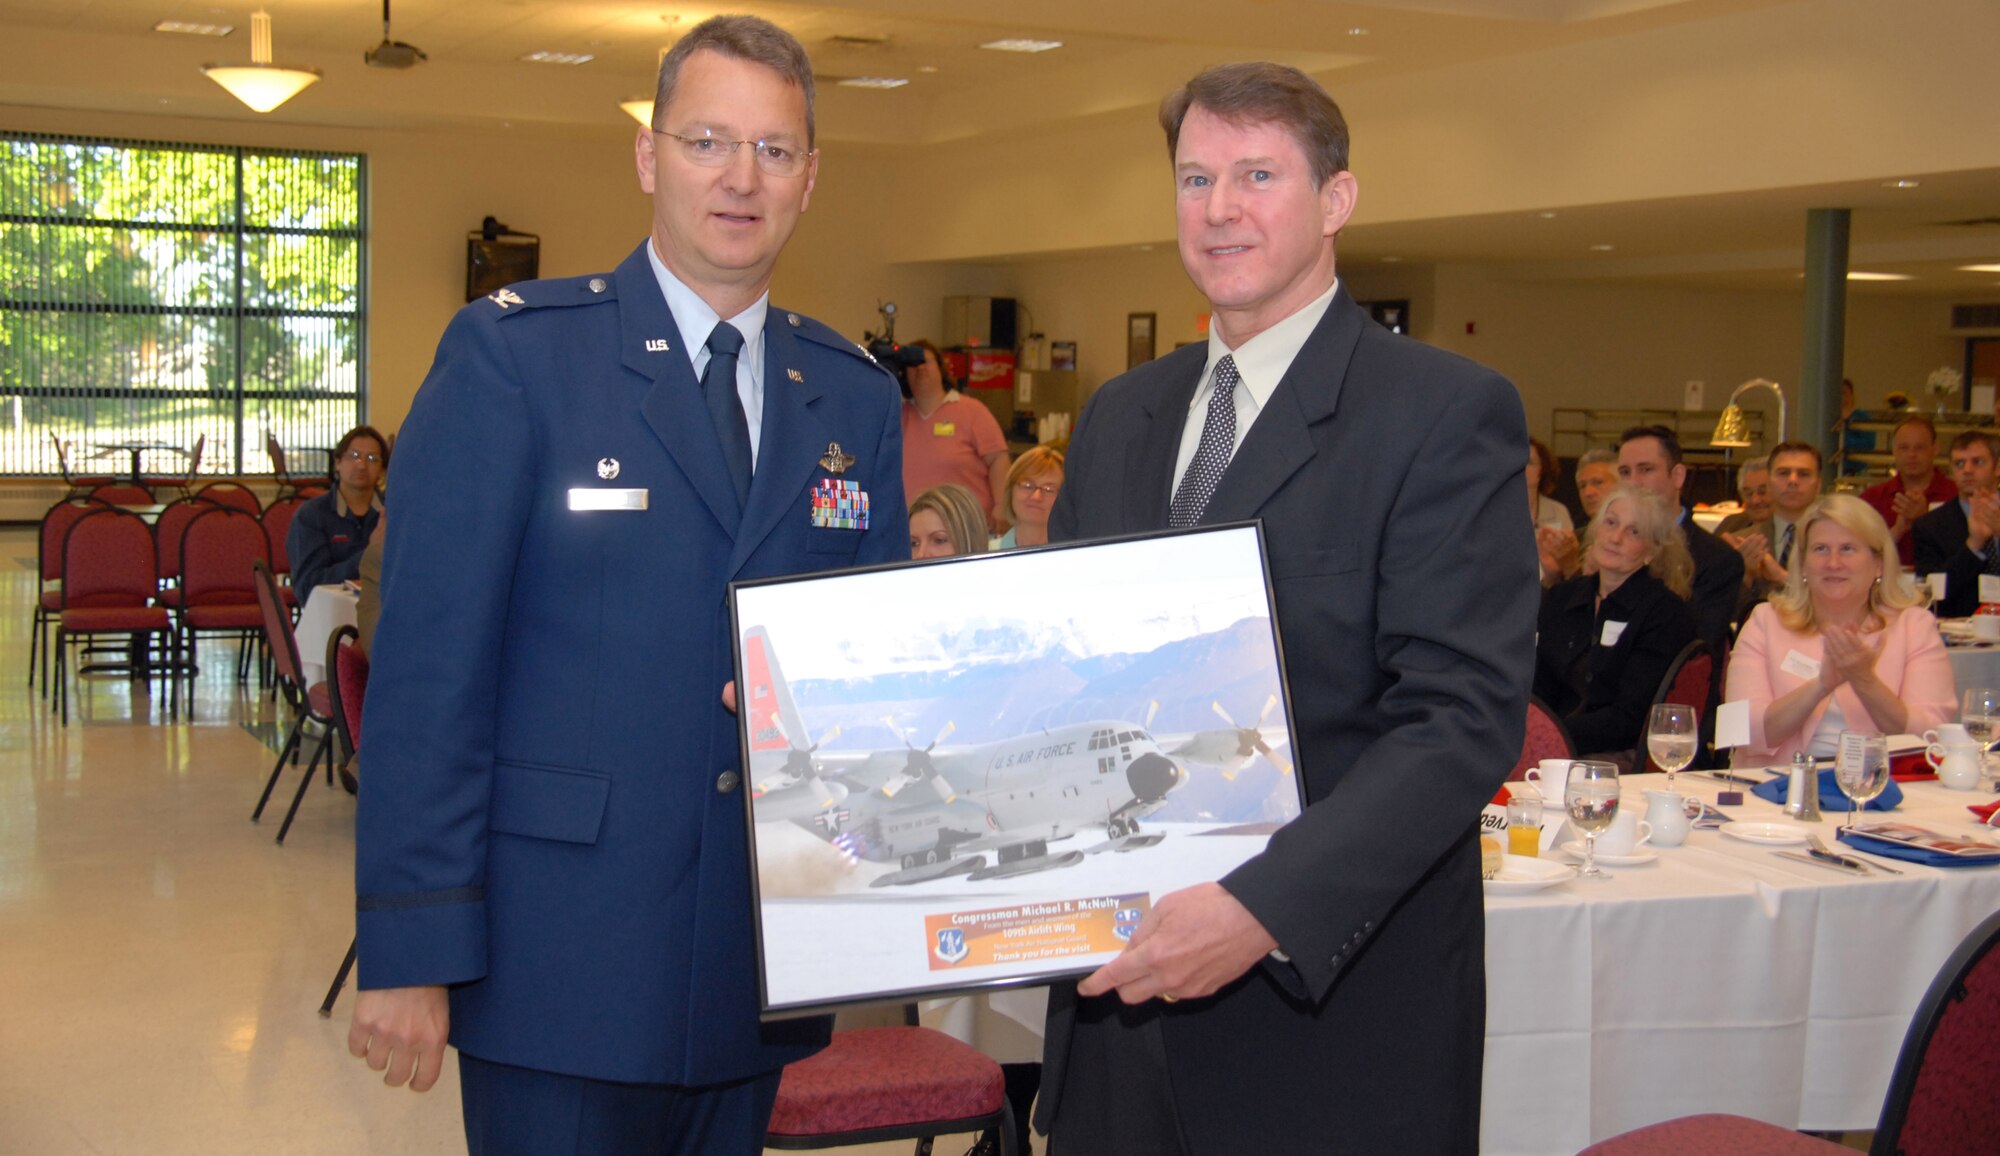 Col. Anthony German presents Rep. Michael McNulty with a photo of the base's LC-130 aircraft during a breakfast ceremony here. McNulty represents the 21st Congressional District. (U.S. Air Force photo by Master Sgt. Willie Gizara)